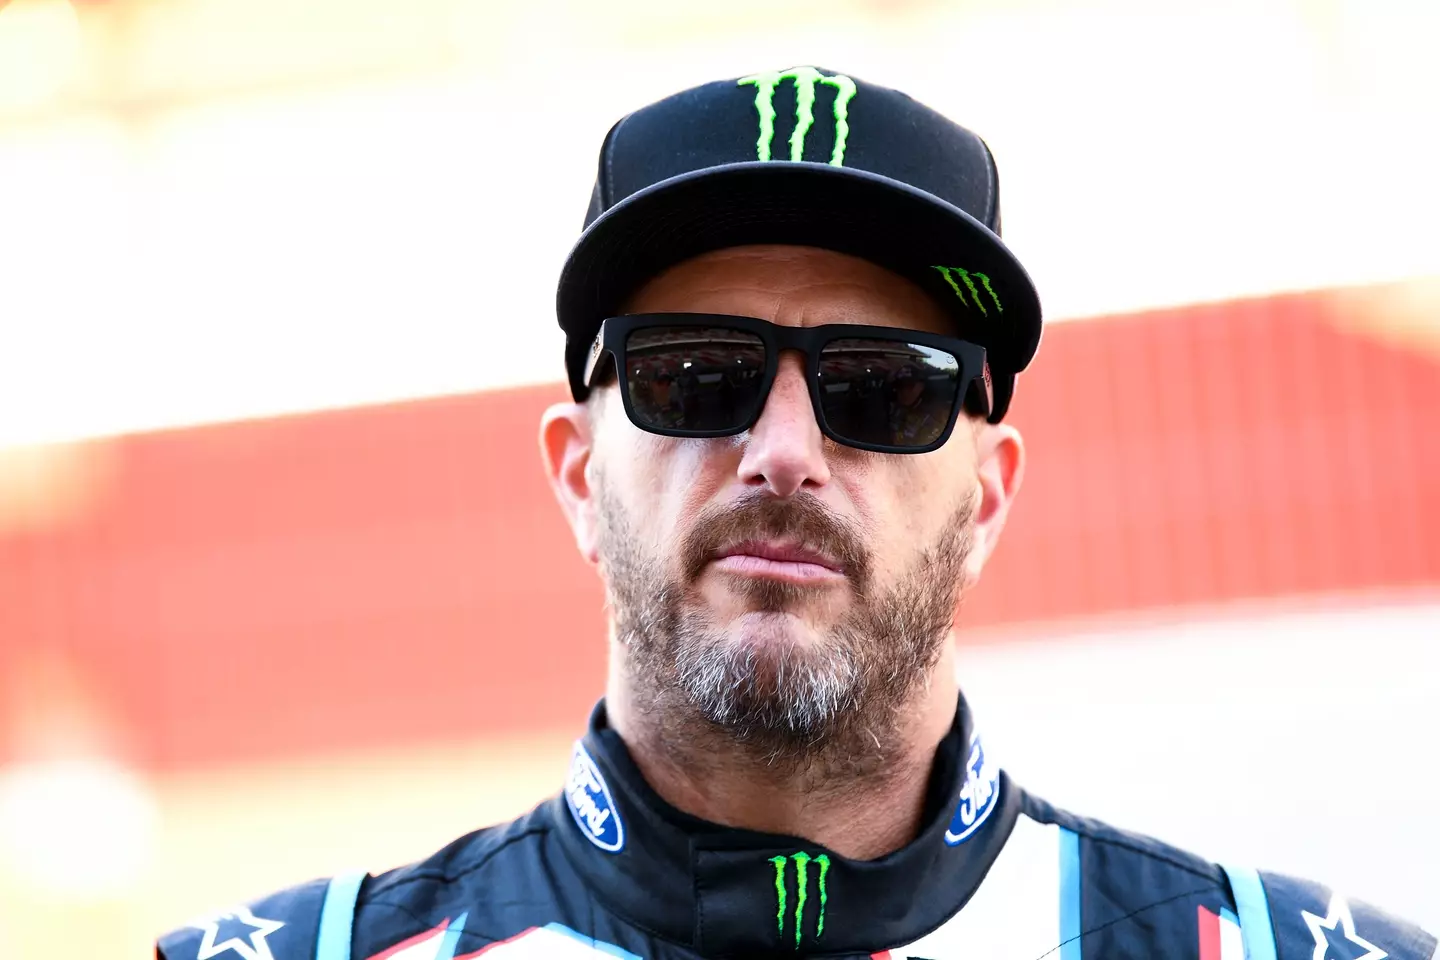 Ken Block died aged 55 due to a snowmobile accident.